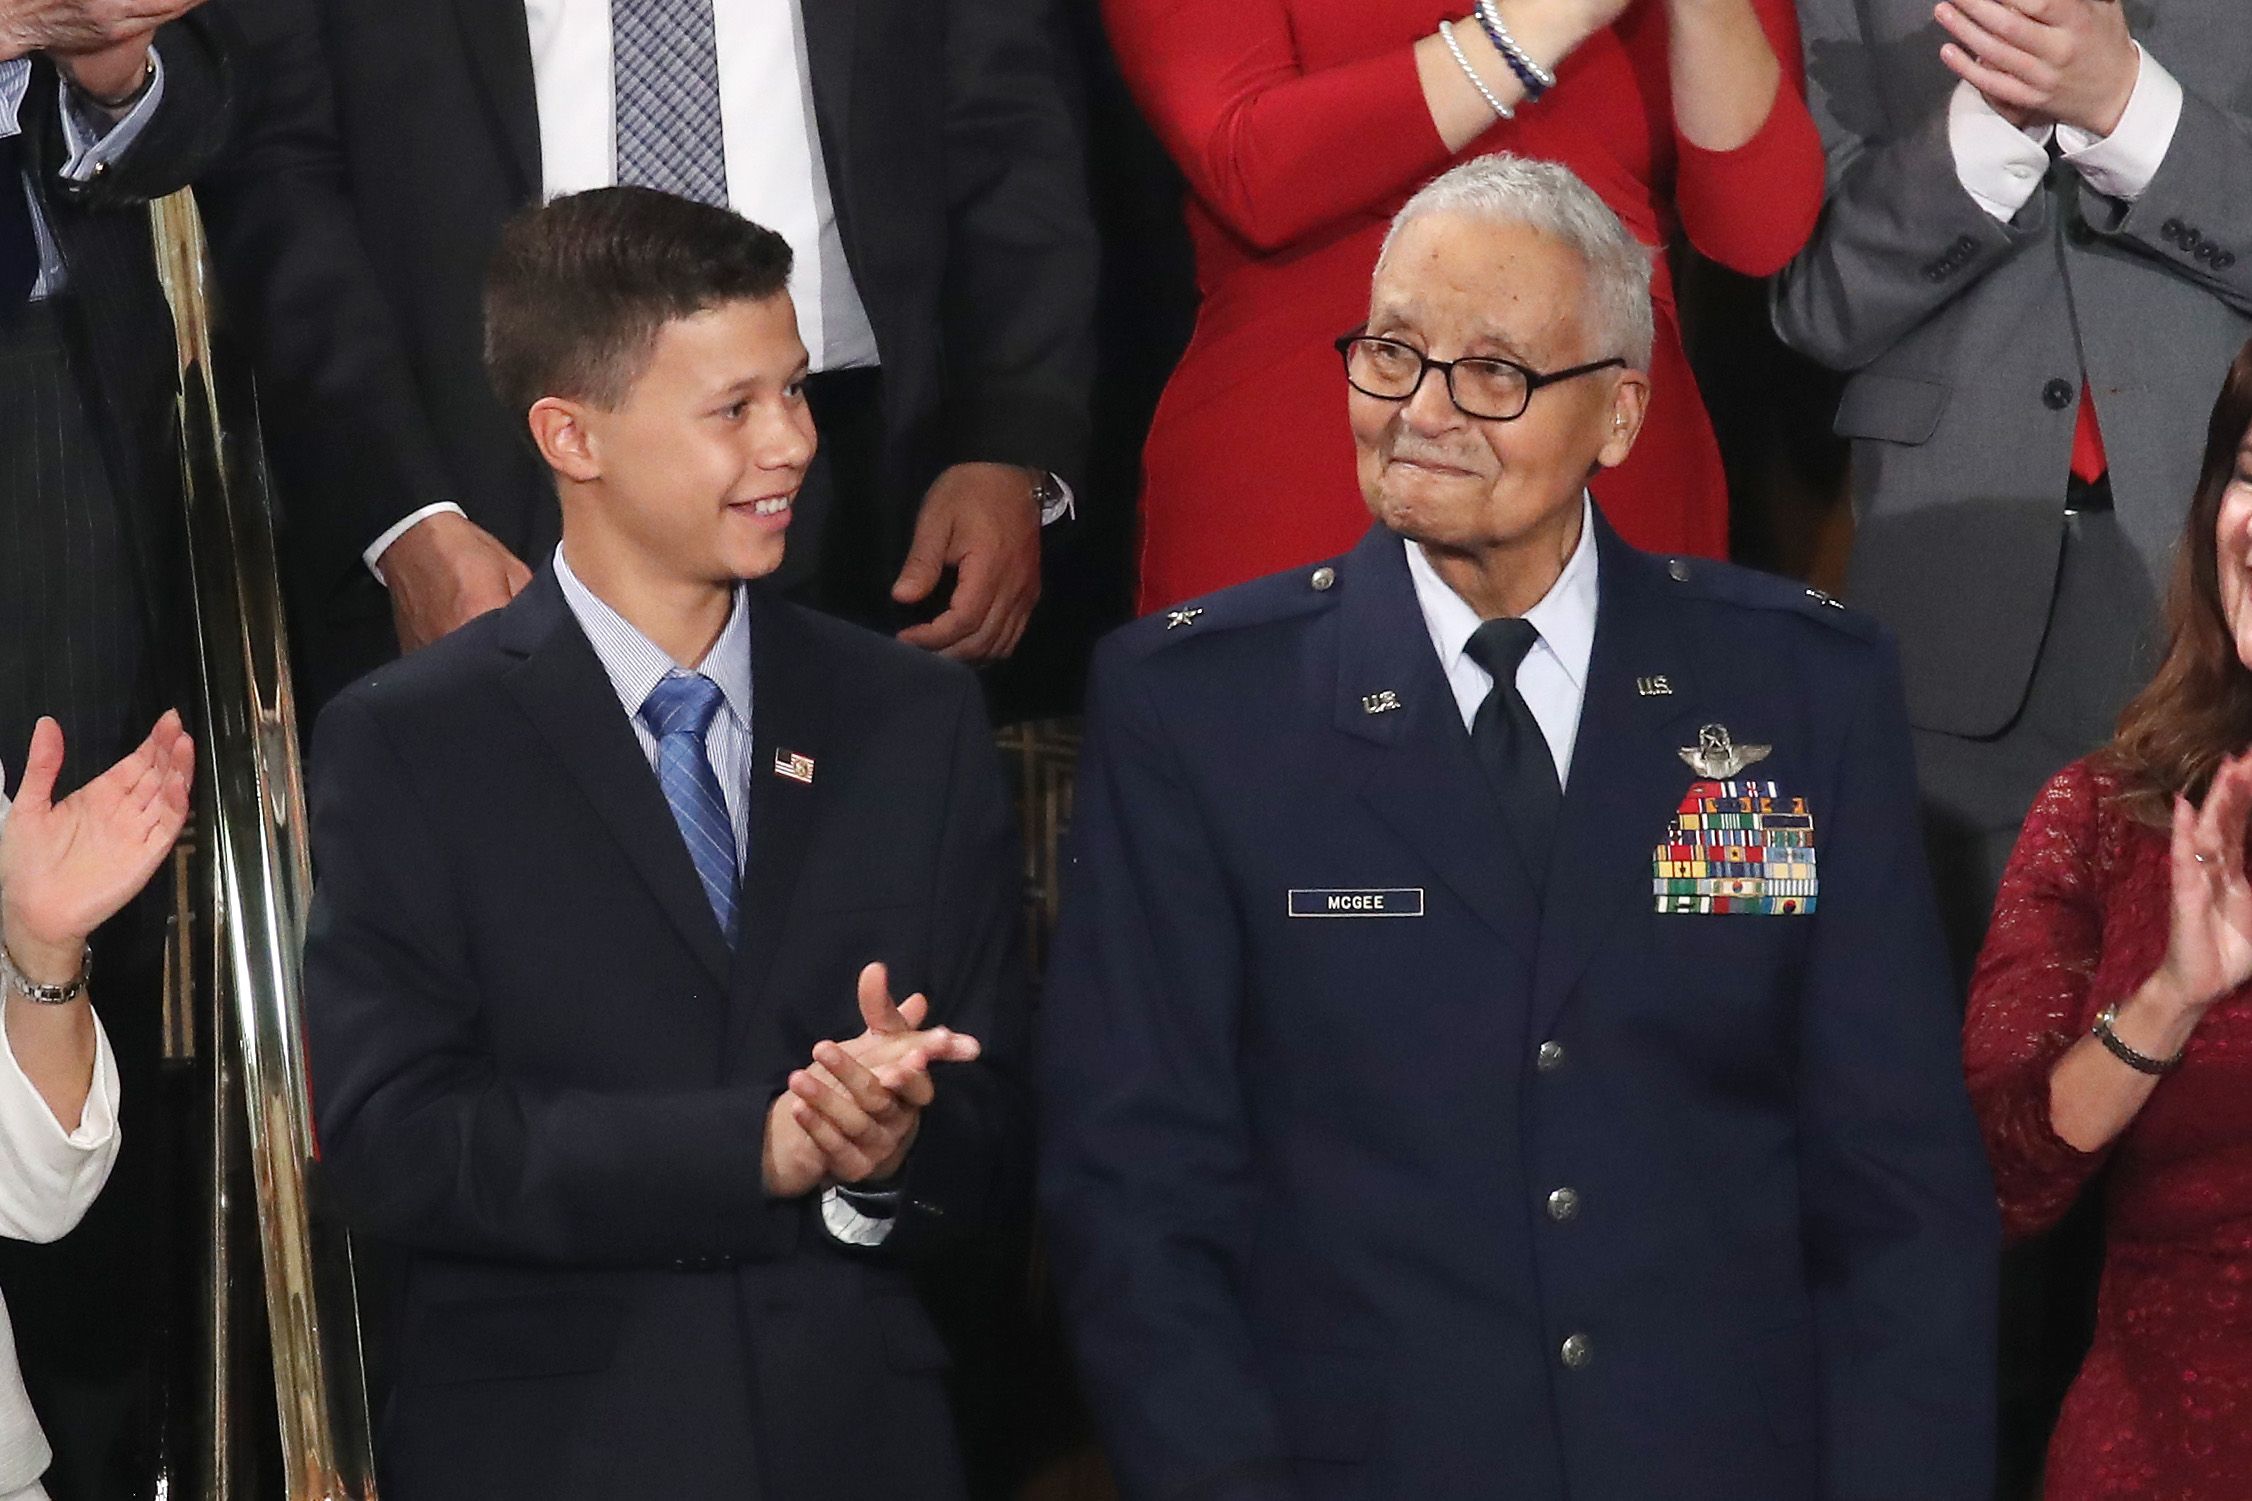 Retired U.S. Air Force Col. Charles McGee, who served with the Tuskagee Airmen, attends the State of the Union address with his great- grandson Iain Lanphier 